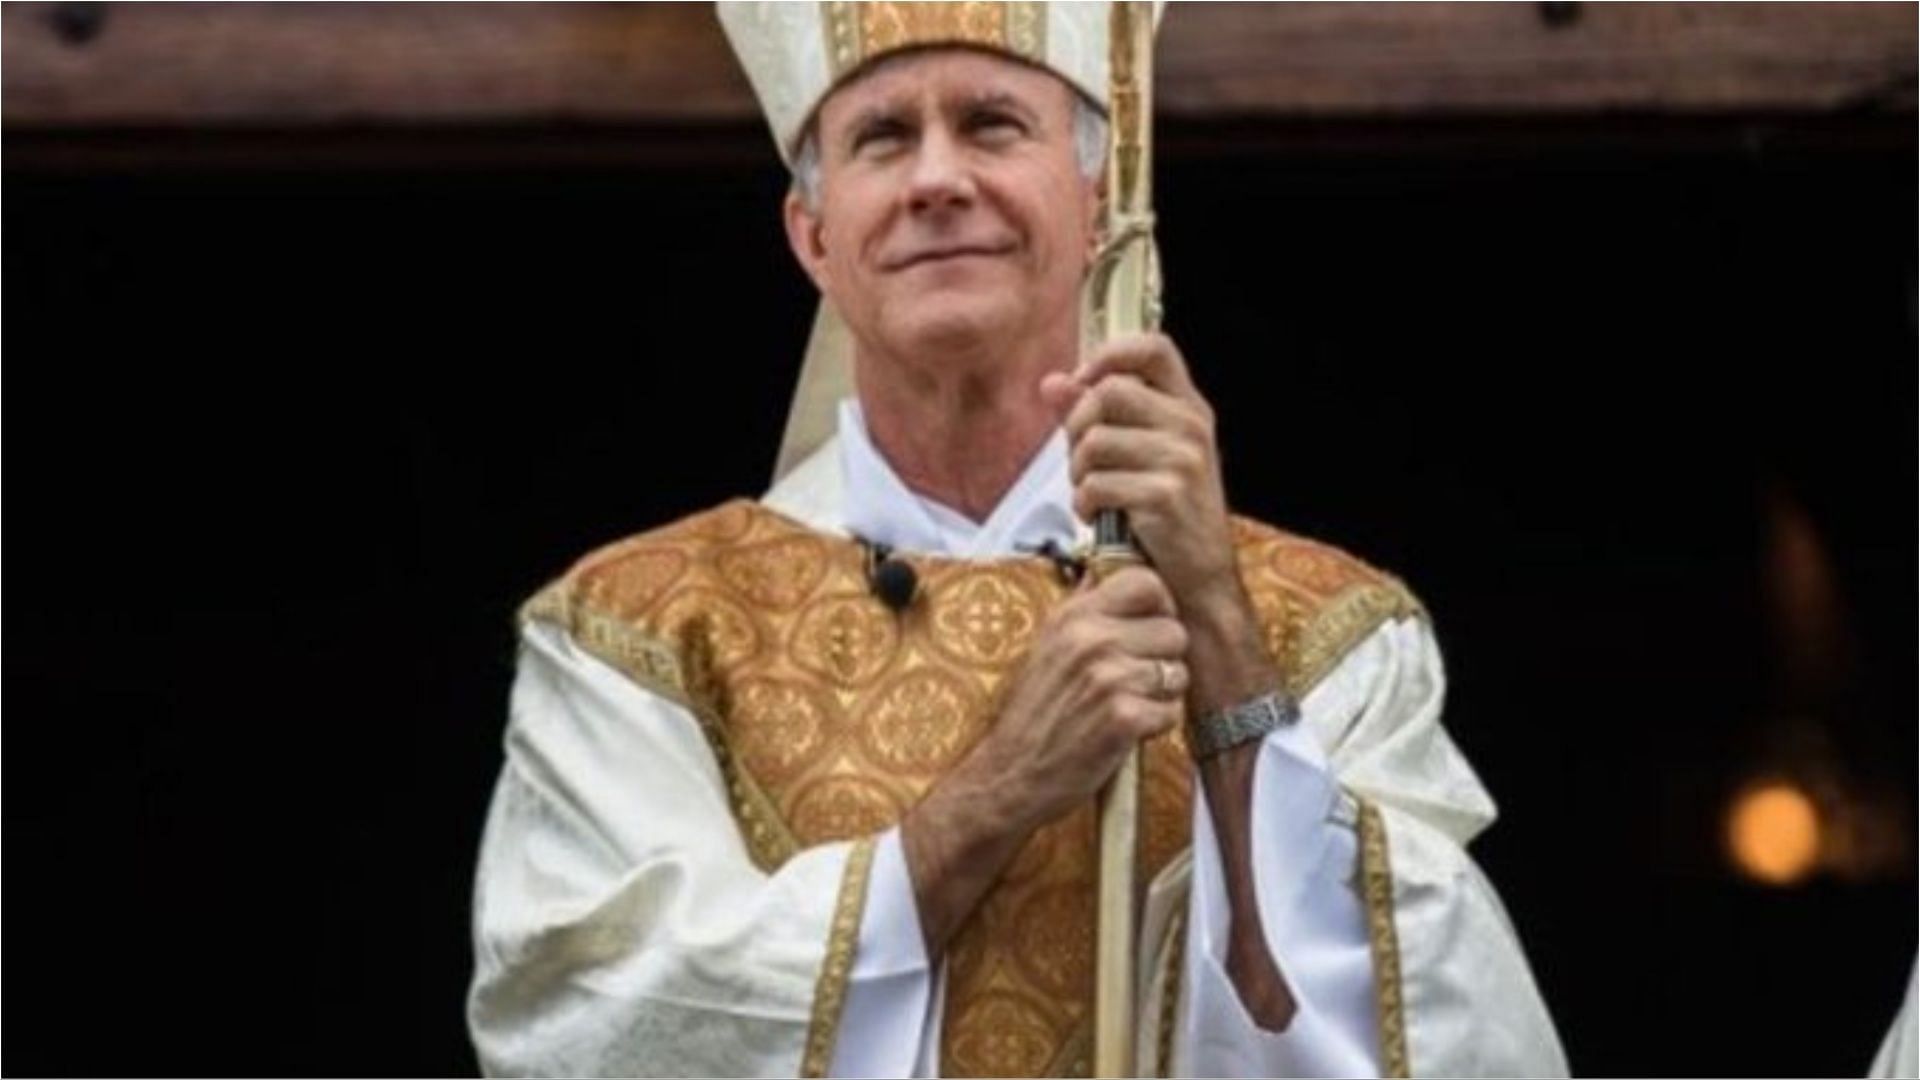 Bishop Joseph Strickland has been removed after a series of investigations against him (Image via JhWestern/X)